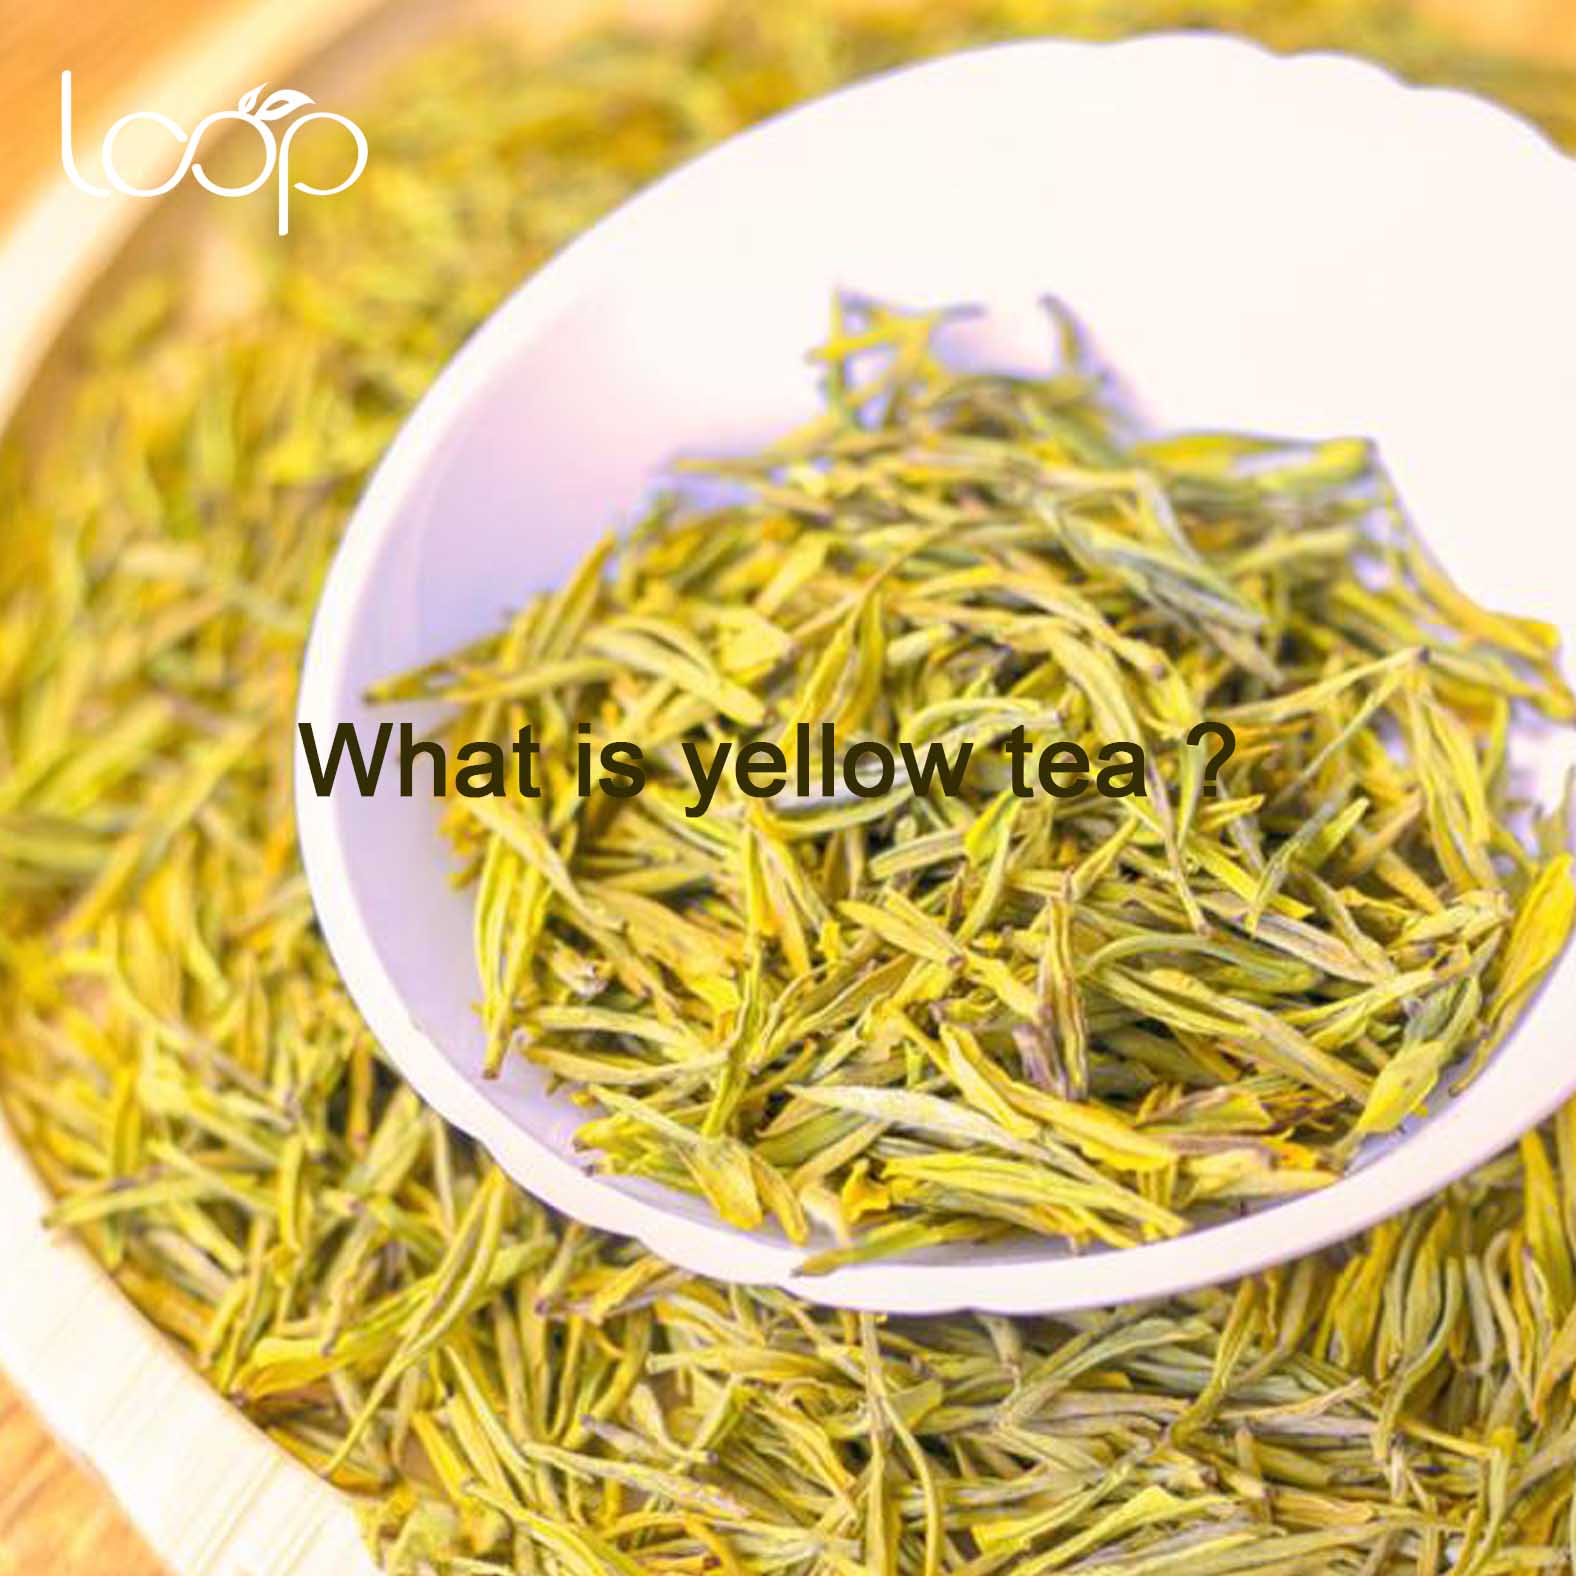 What is yellow tea?